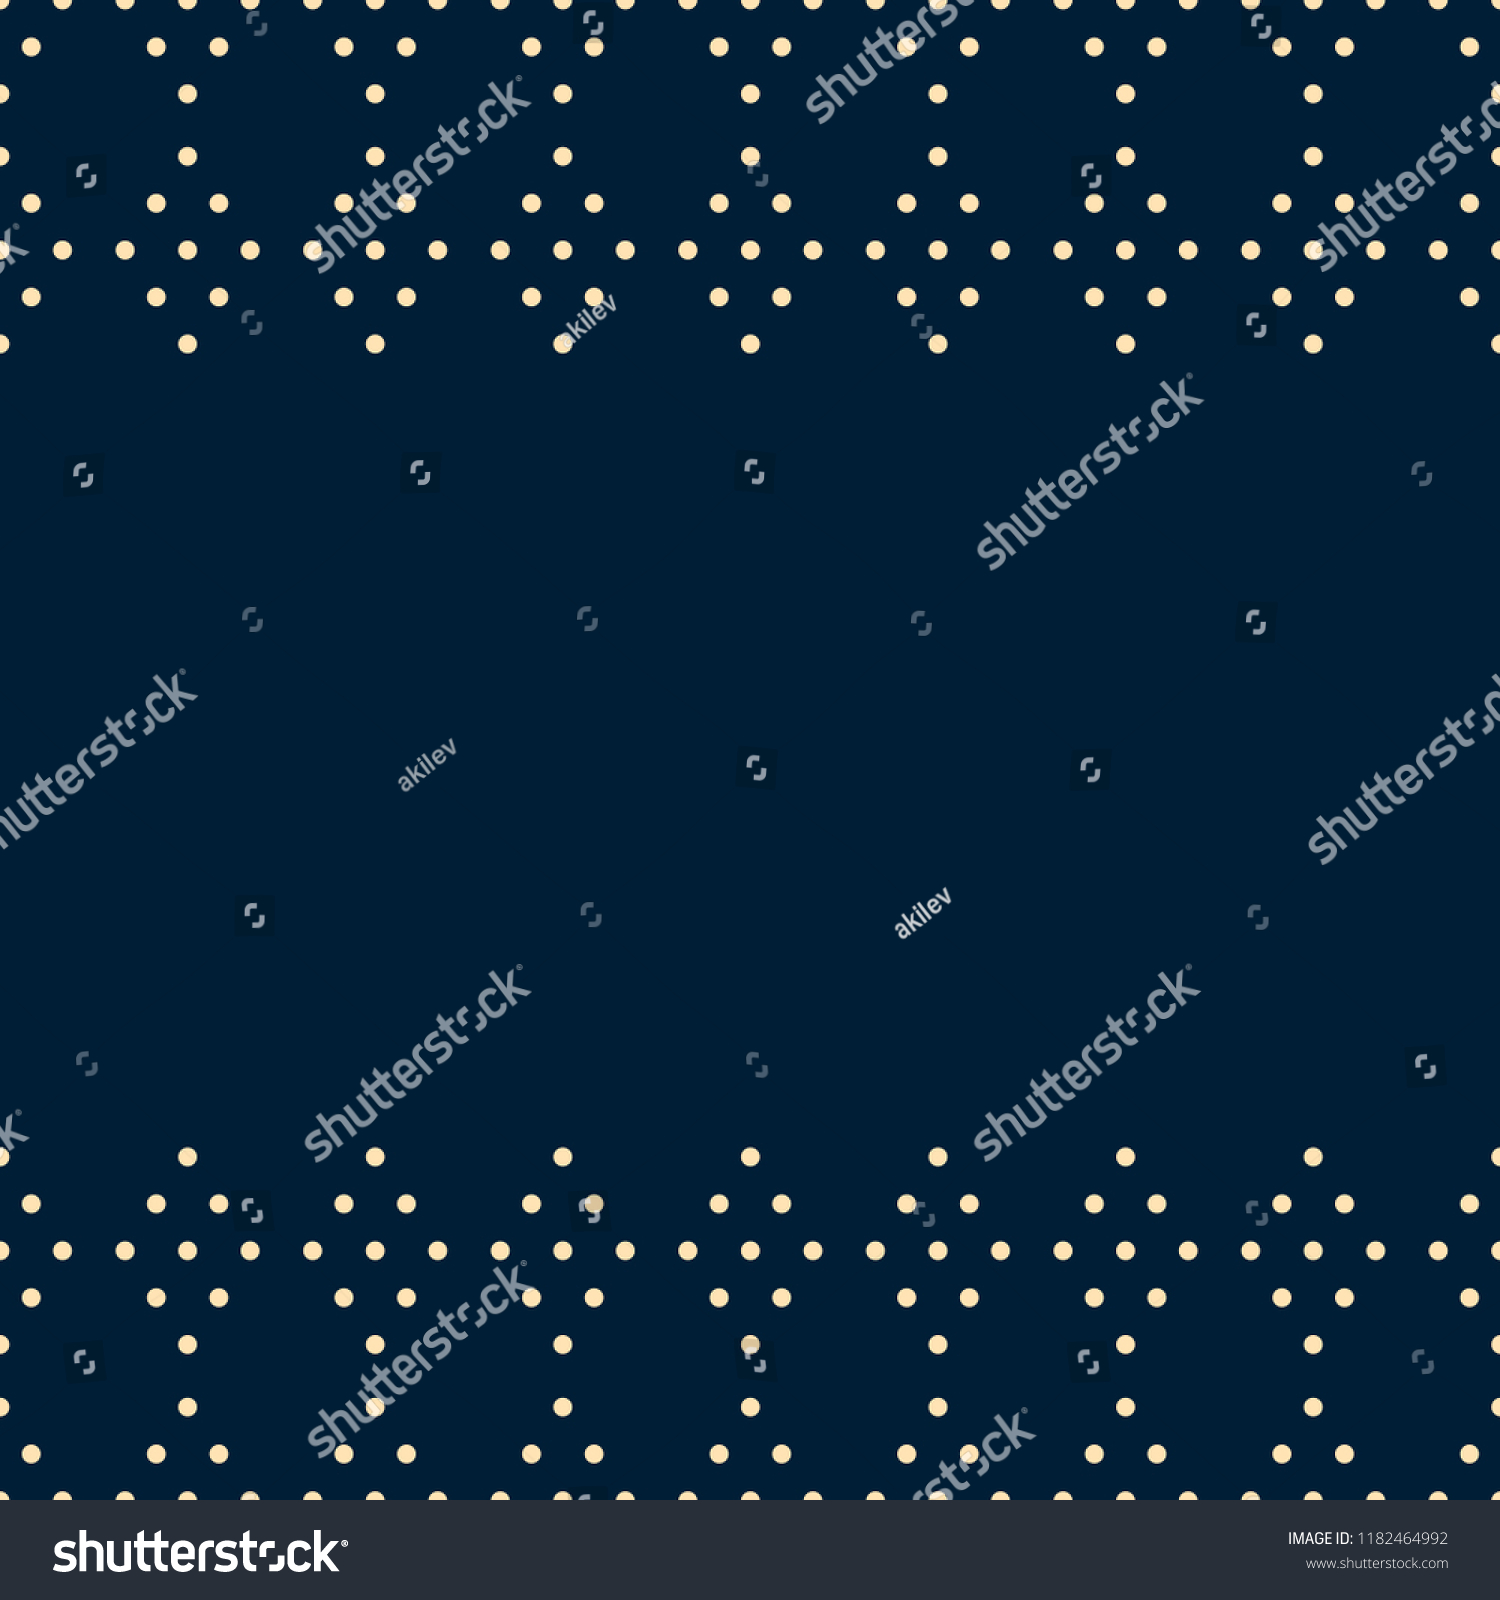 SVG of Vintage Christmas banner design pure white dimond motif pattern classic blue background. Simplicity concept digital illustration. Simple geometric all over print block for holiday decoration. Svg file svg